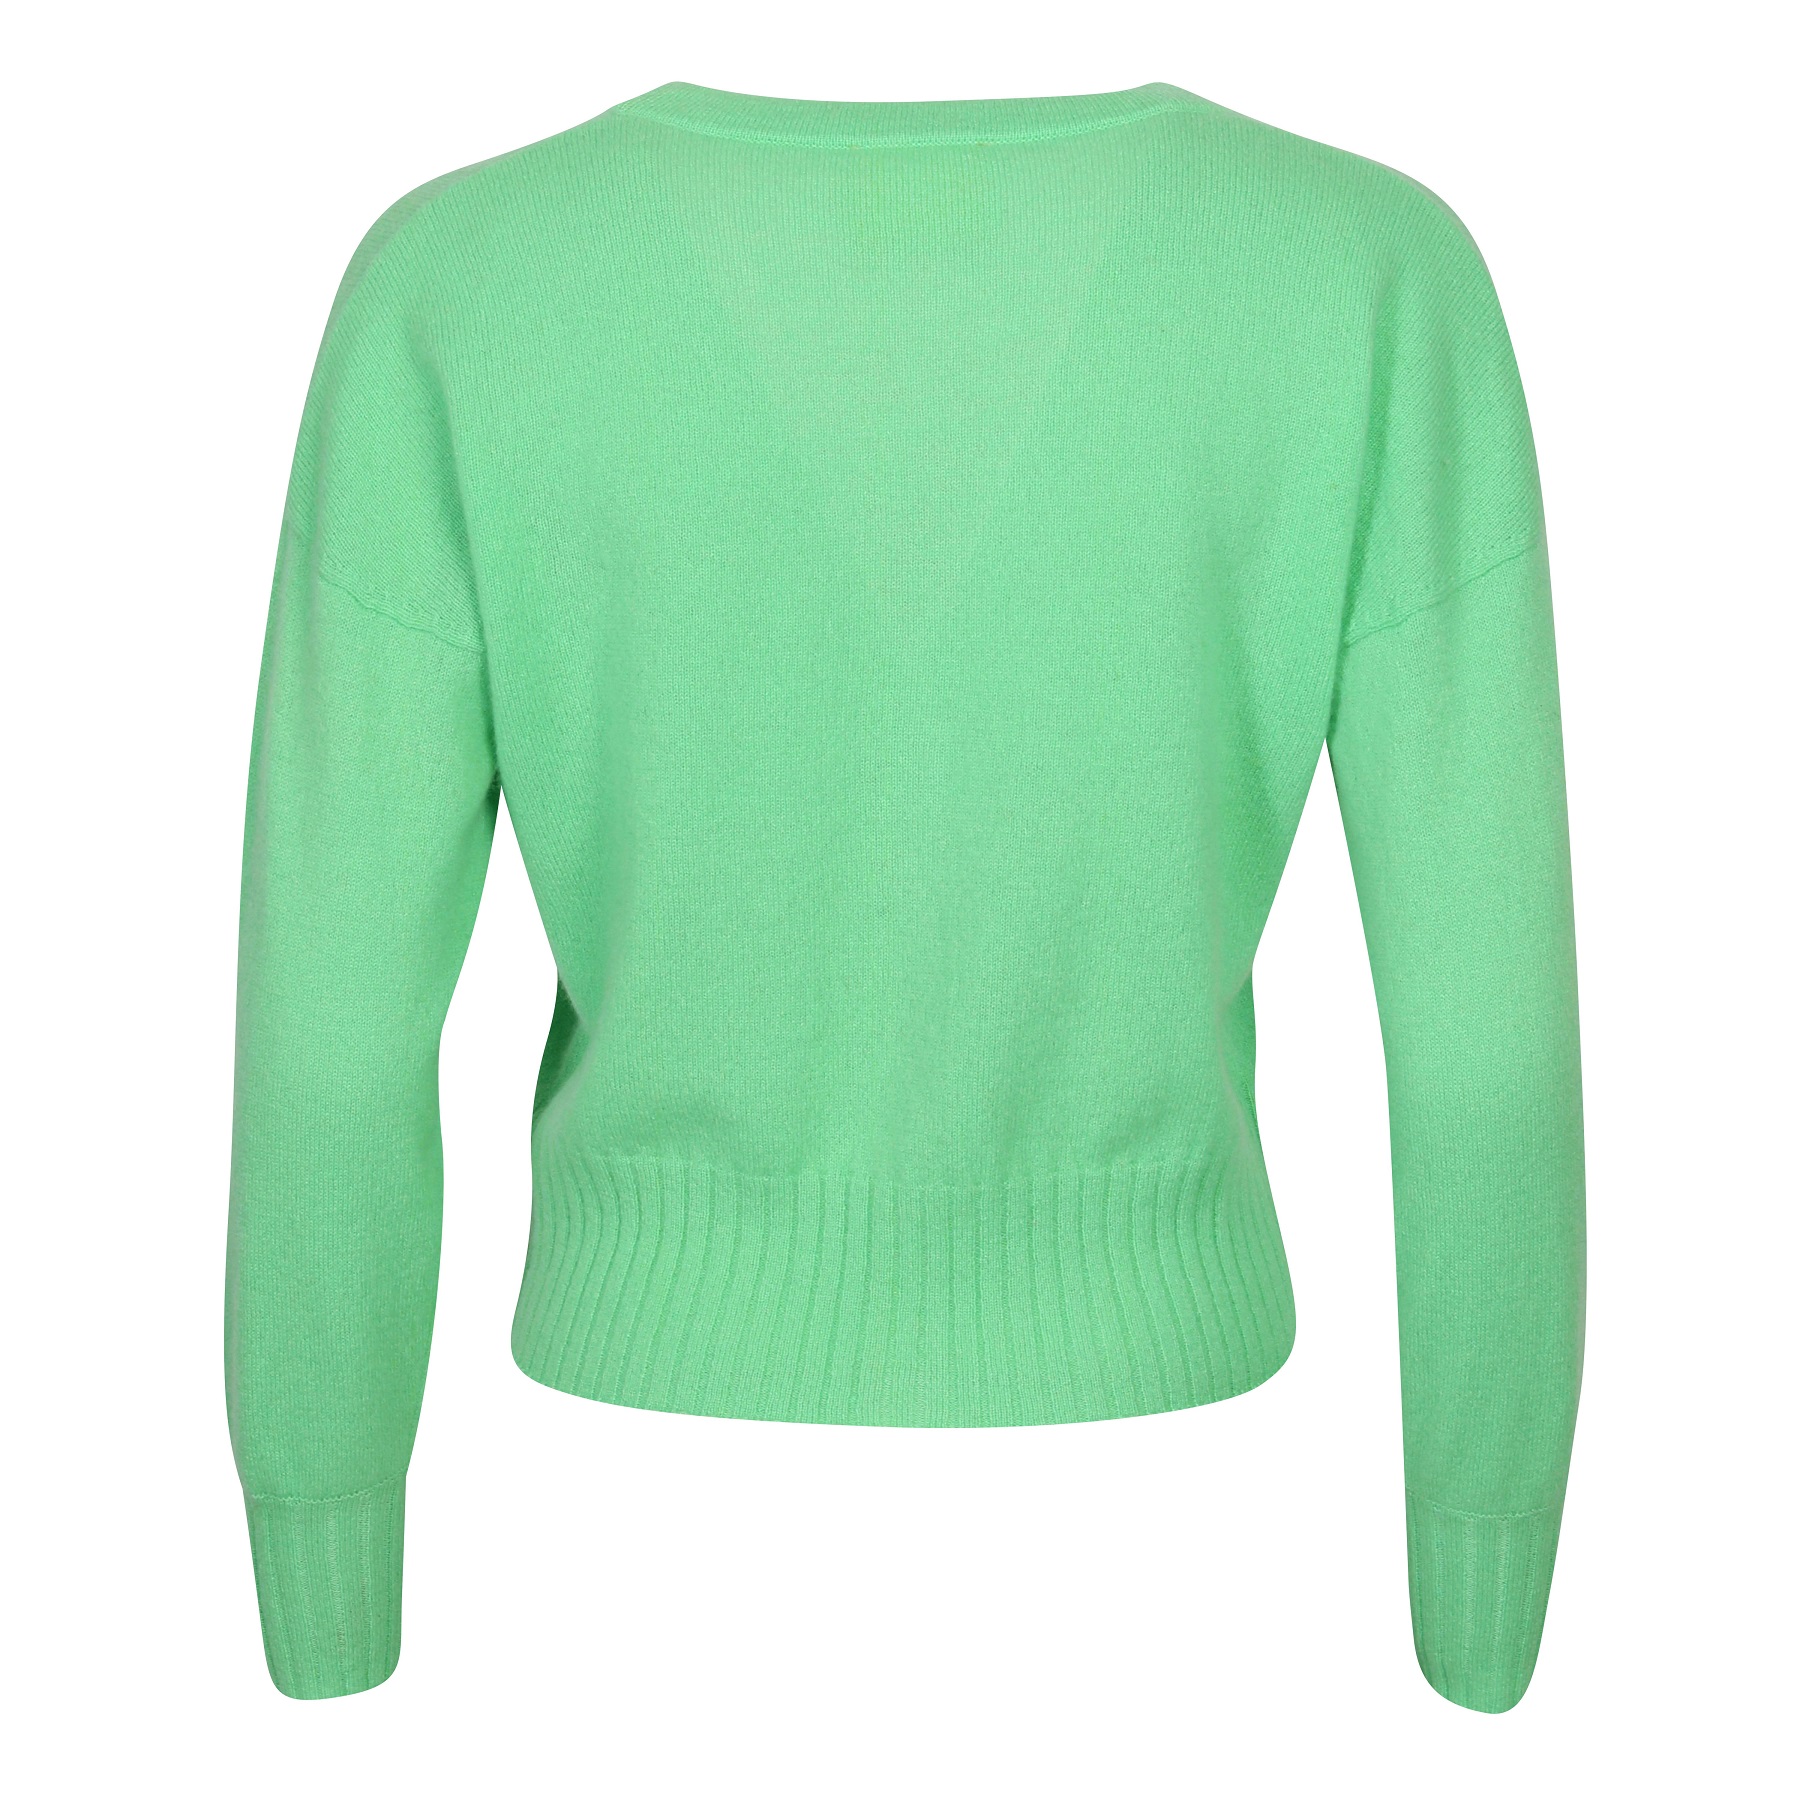 Absolut Cashmere Cardigan in Light Green L